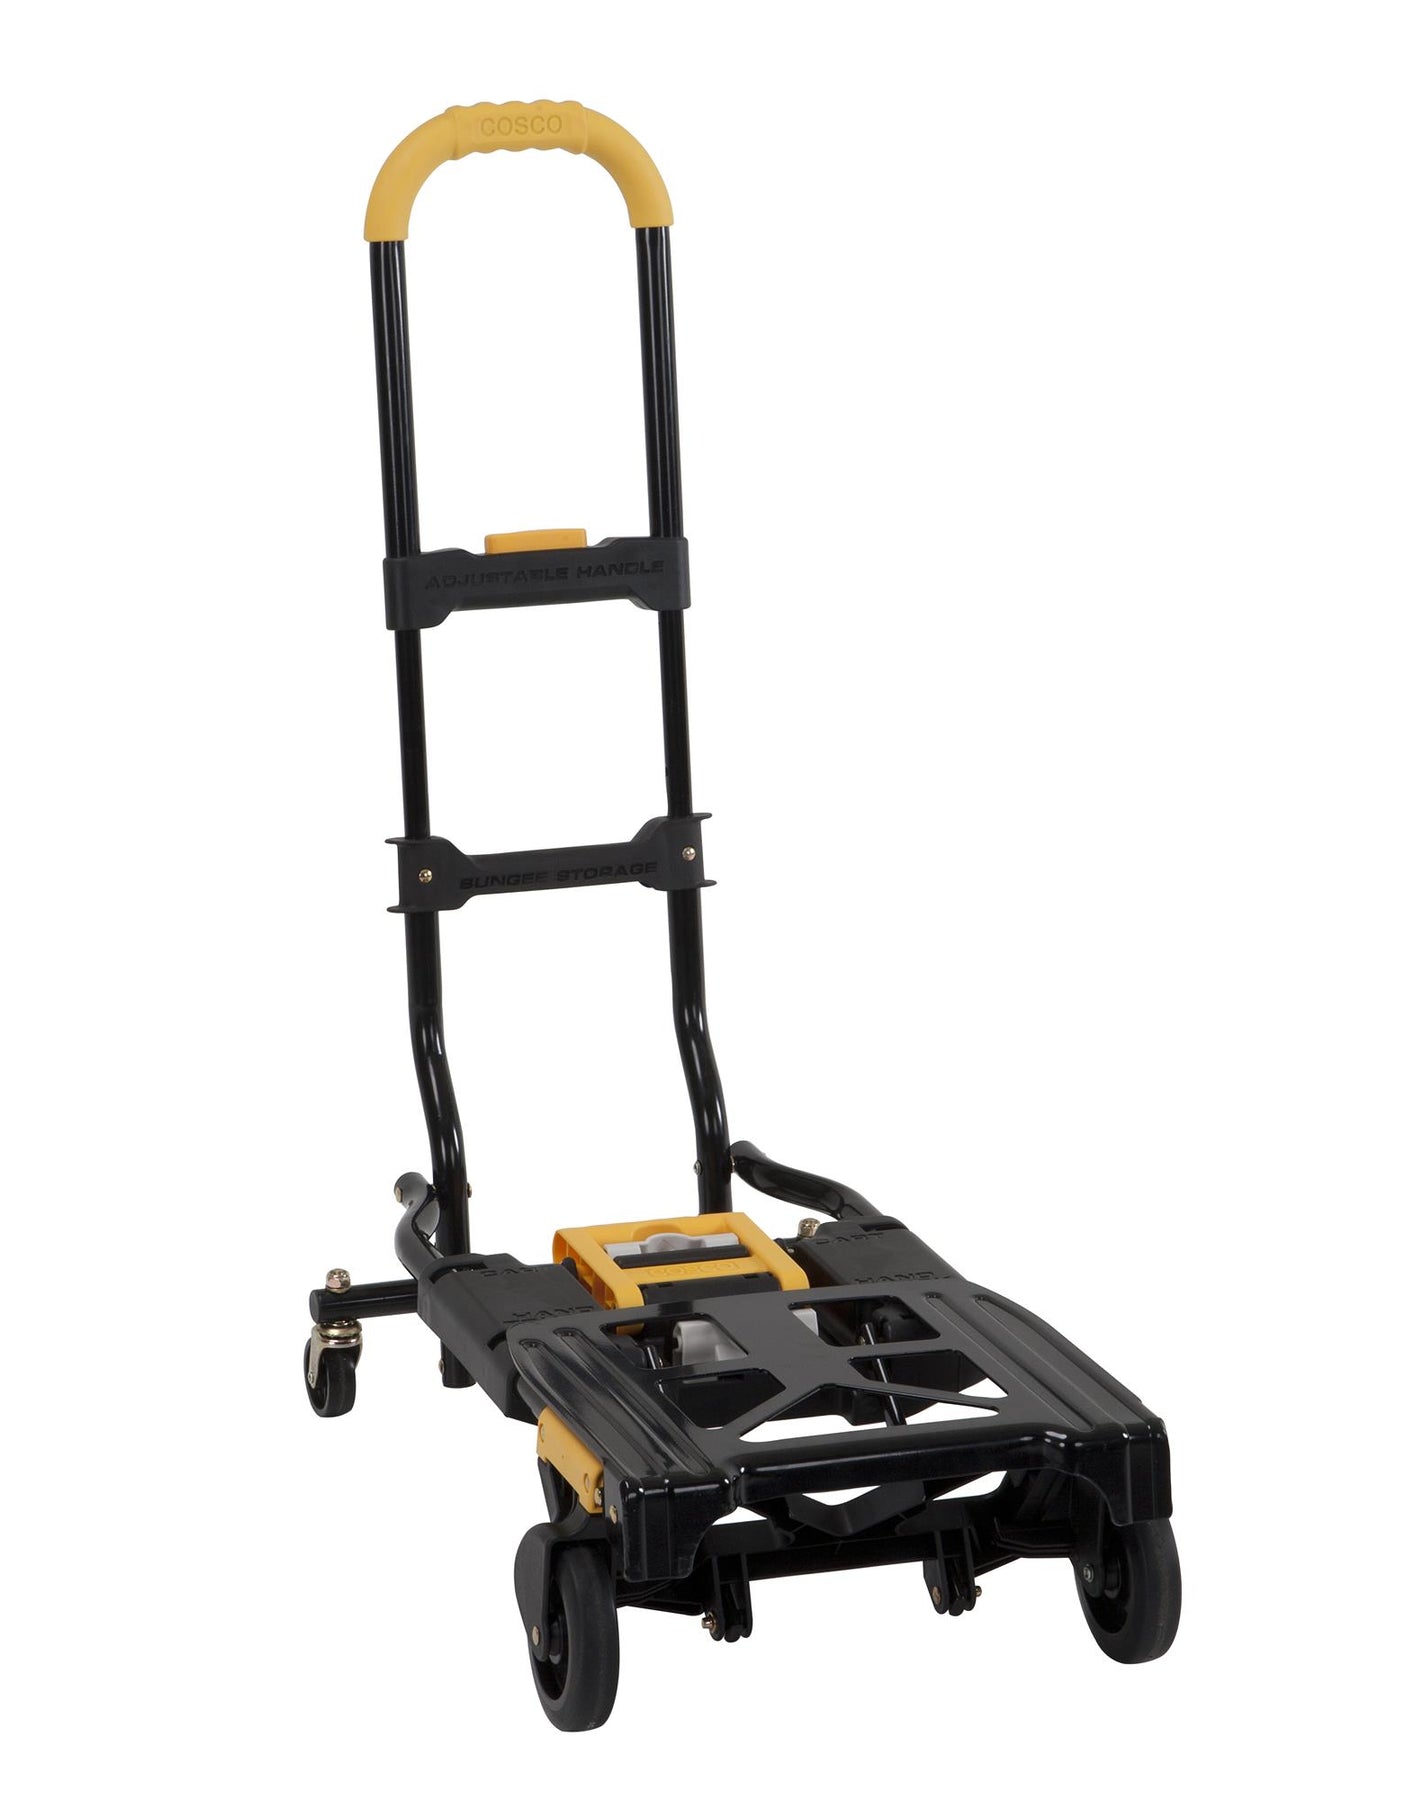 Multi-Position RealRooms 2 Hand Truck Extendable 1 – in with Folding Handle